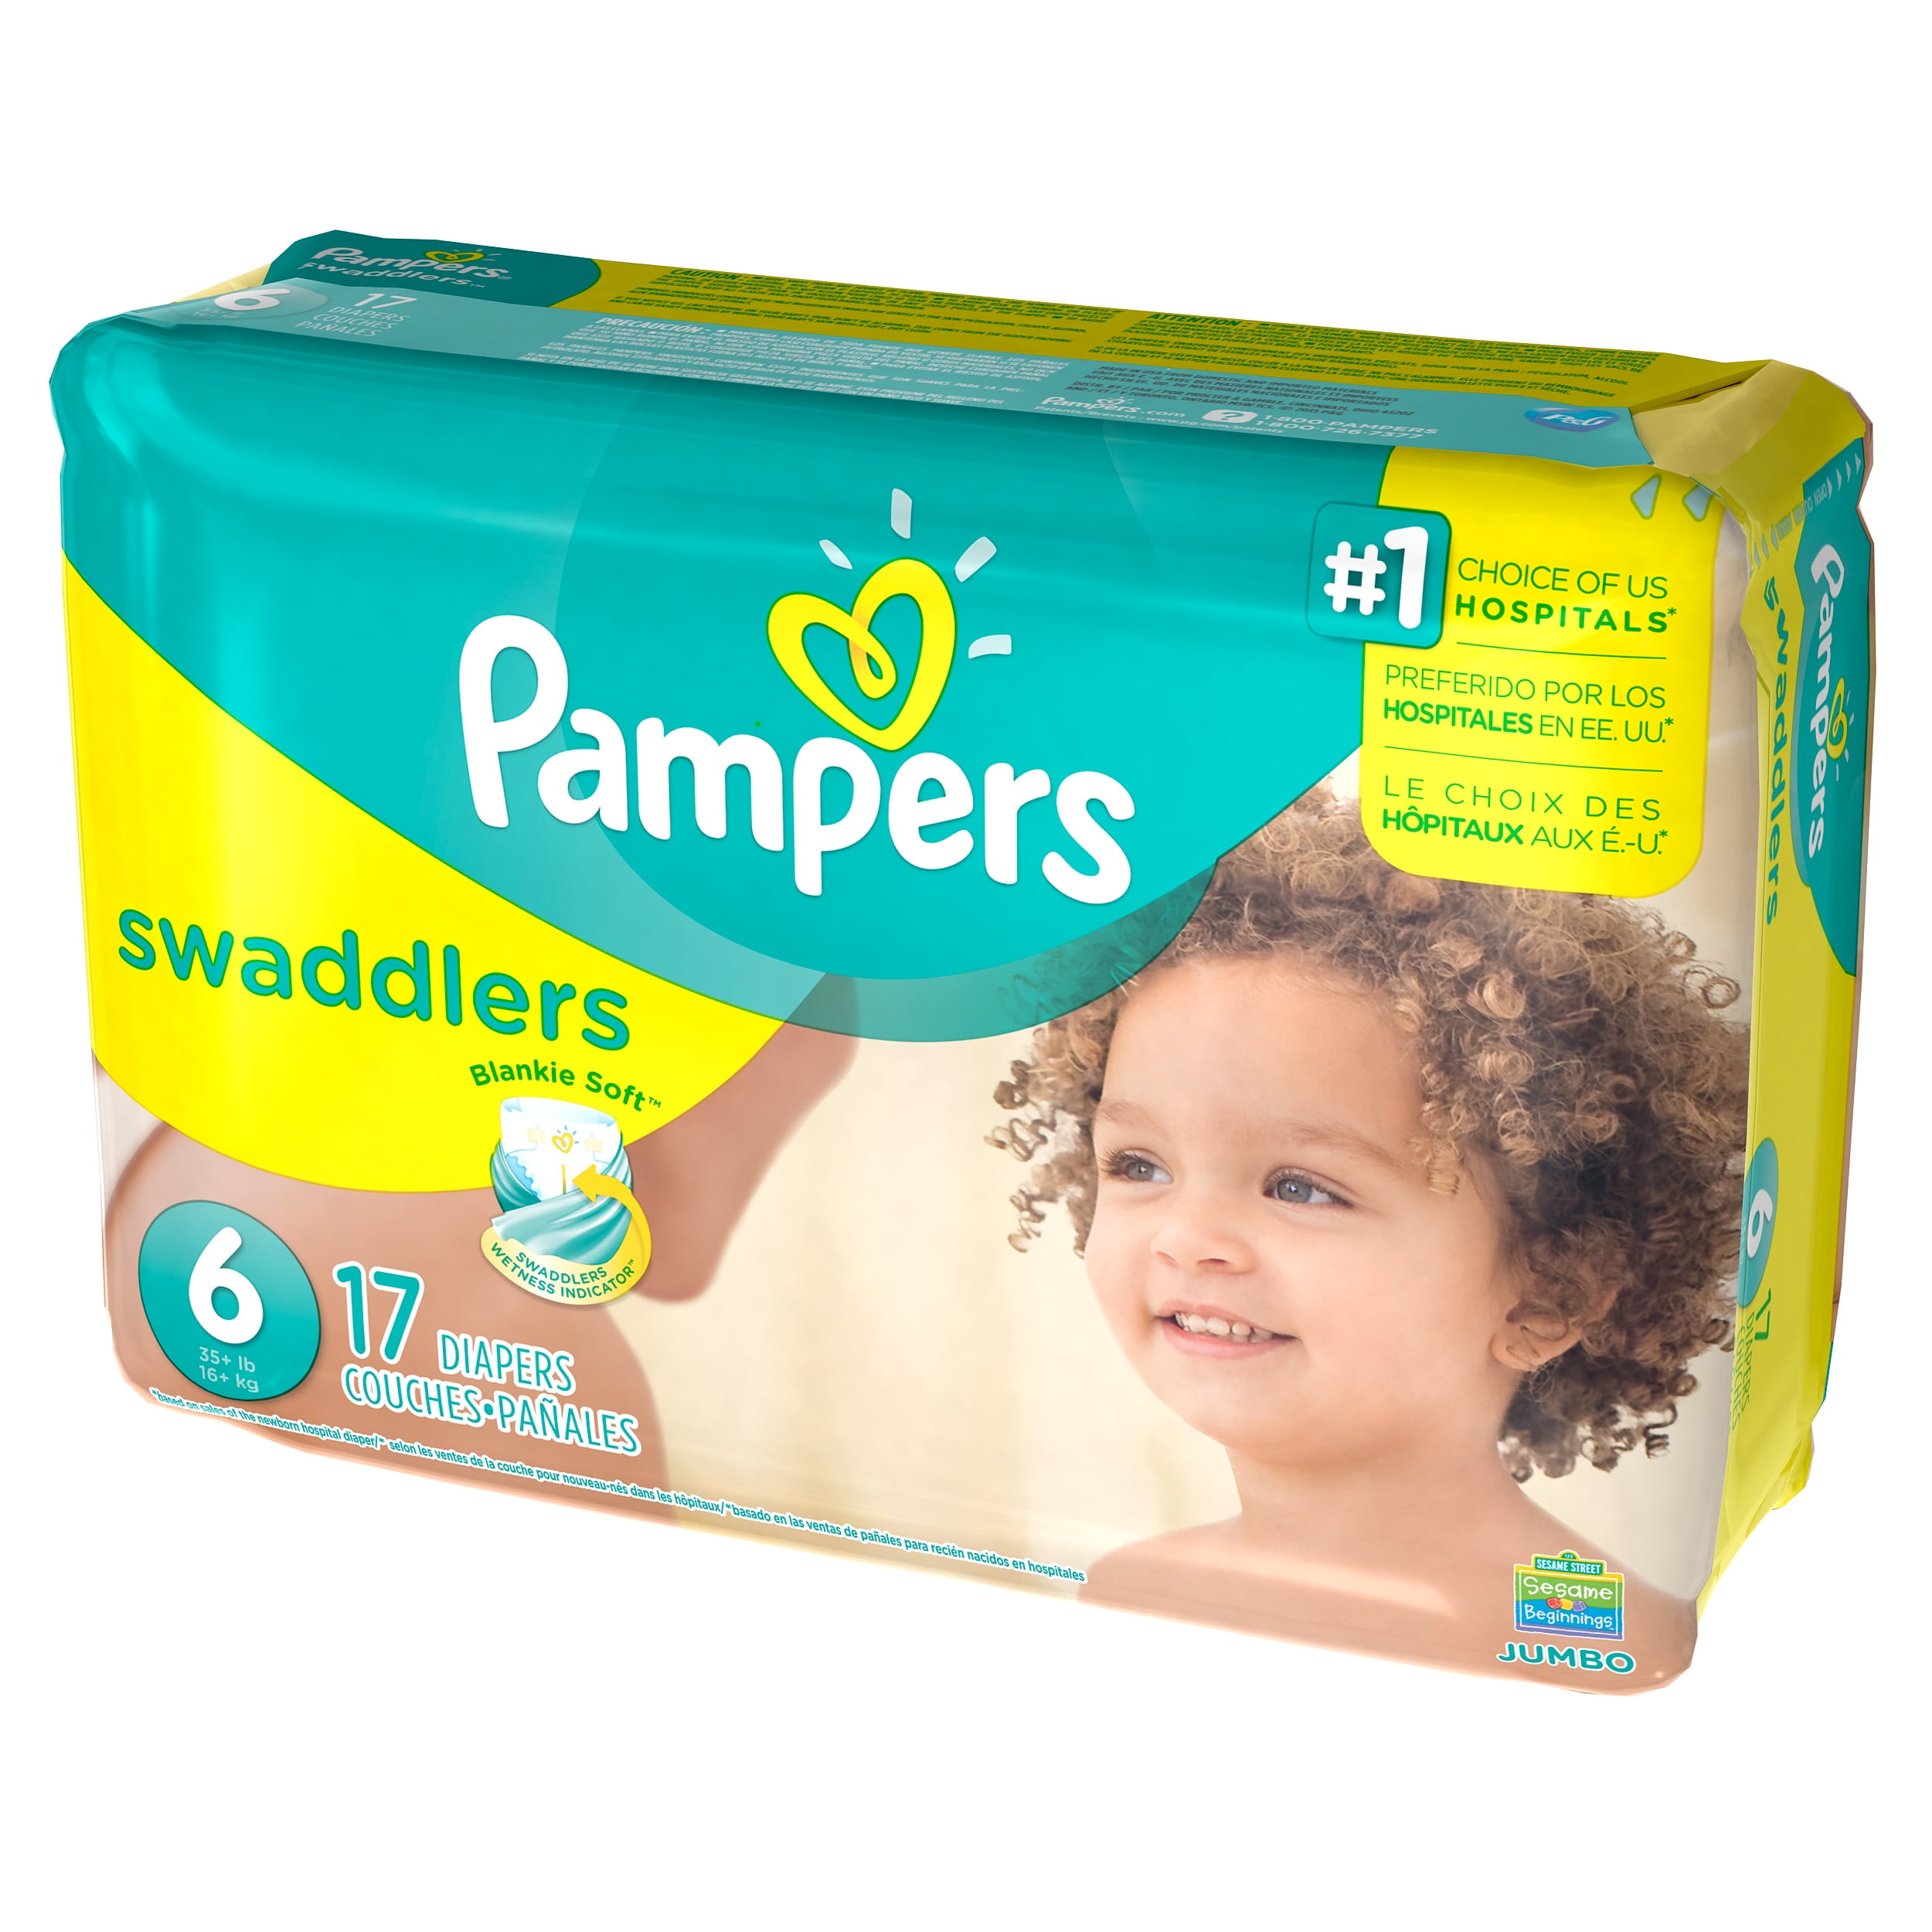 pasatiempo ratón o rata representante Pampers Swaddlers Diapers Size 6 17 count - Walmart.com